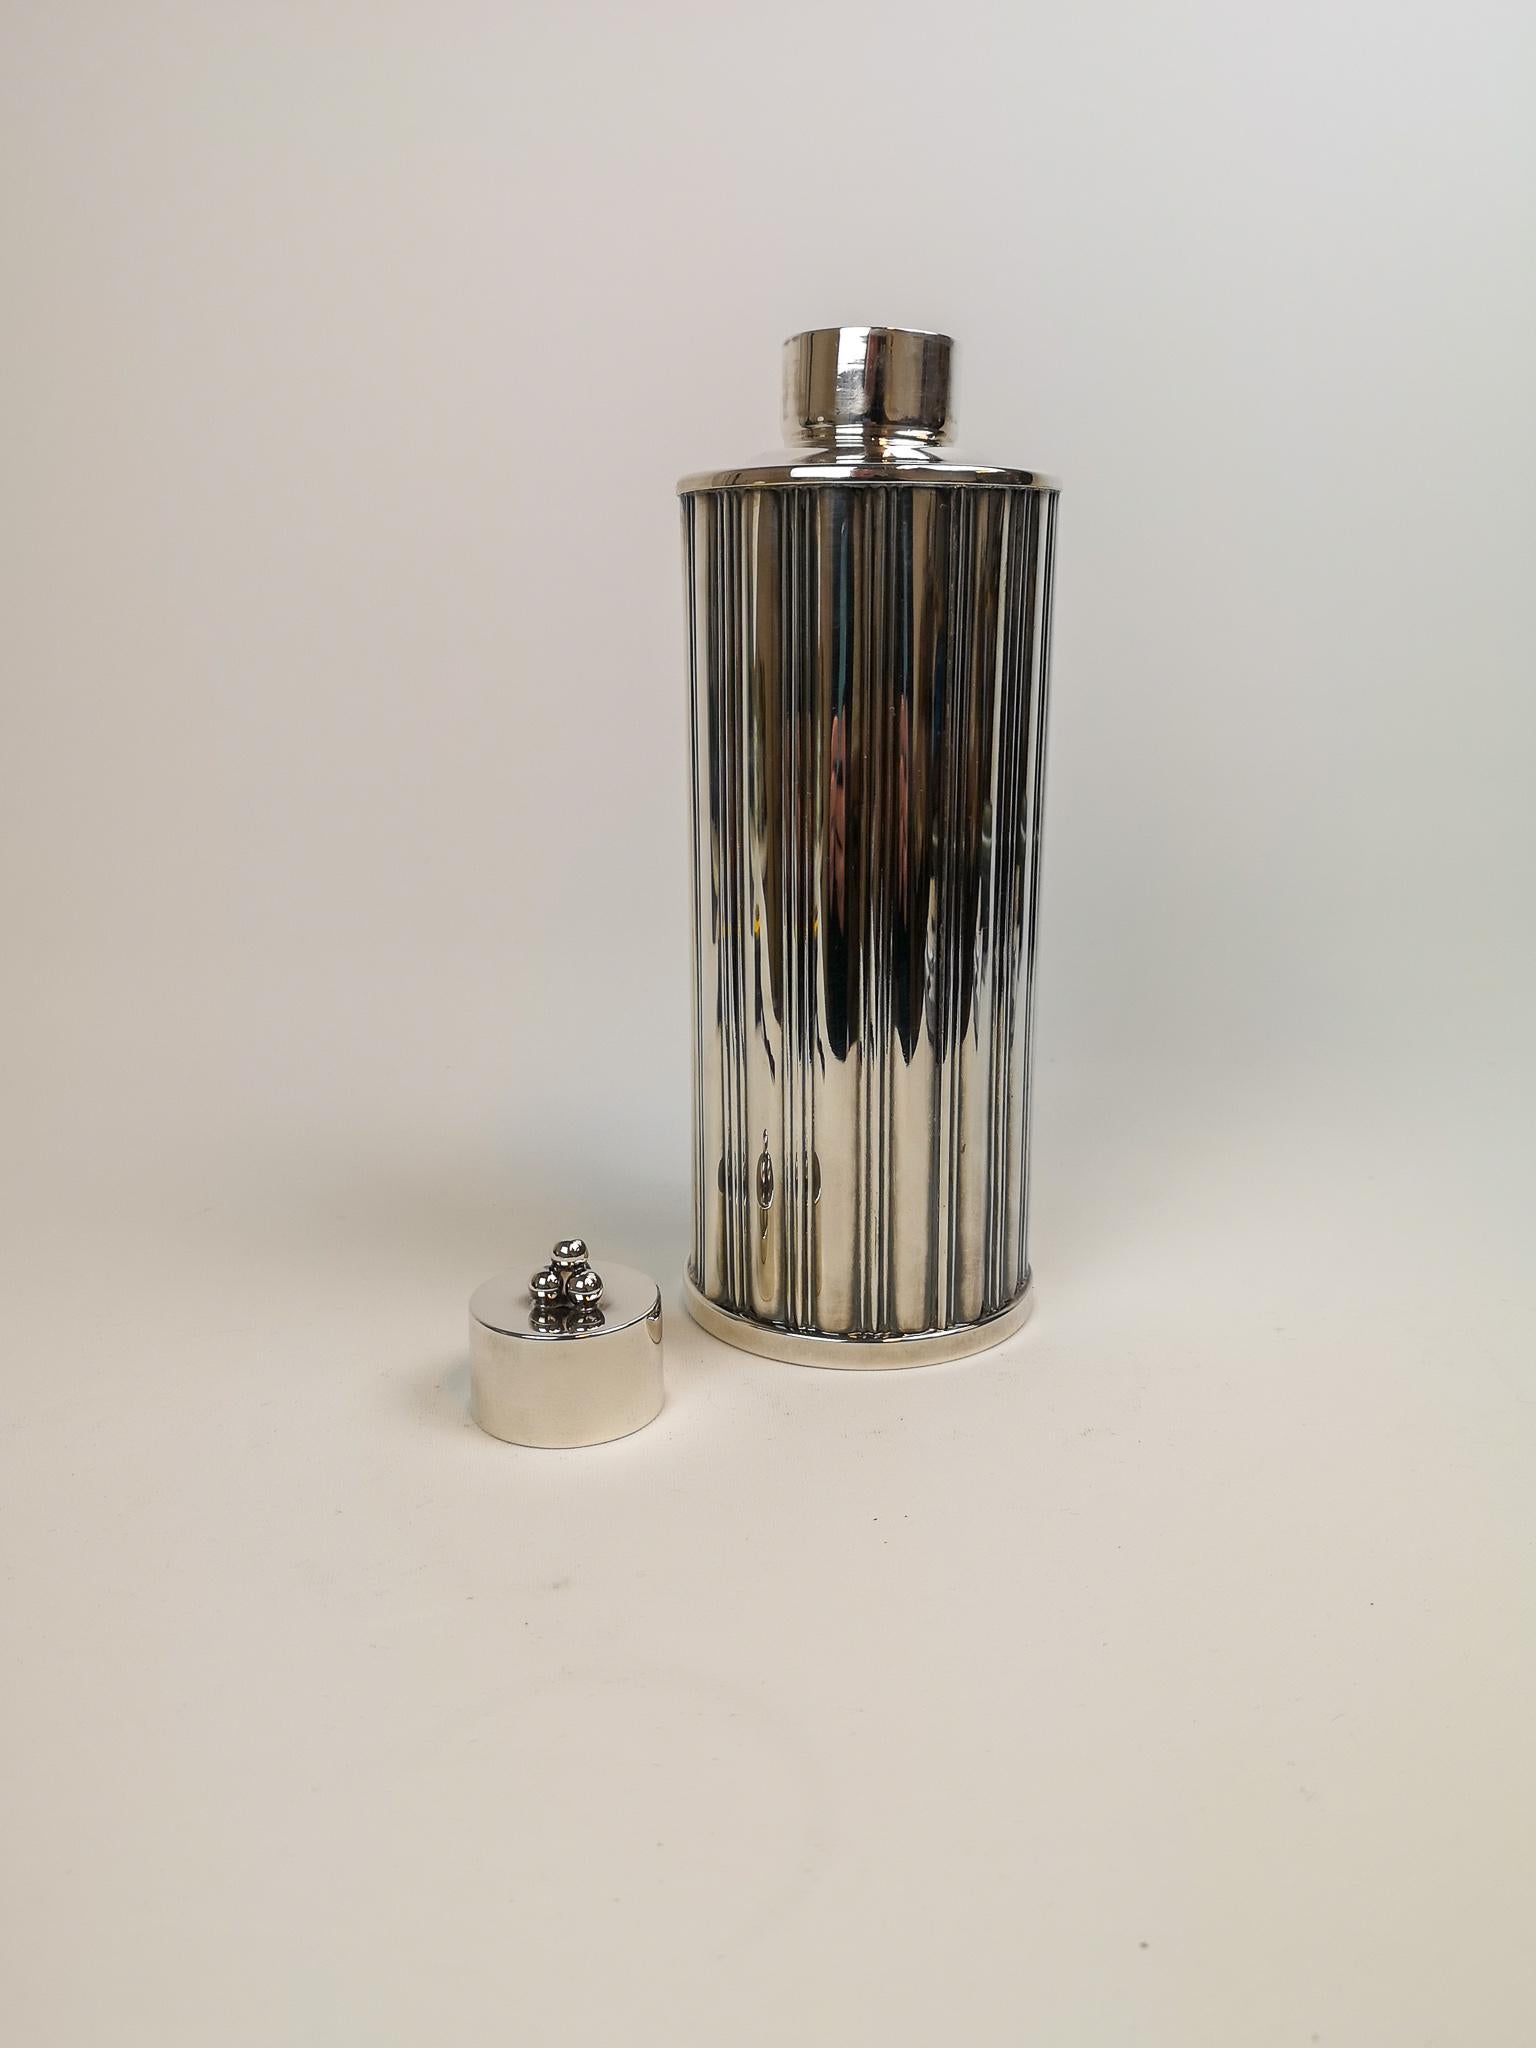 This wonderful Swedish Grace cocktail shaker was produced in Sweden, circa 1930s. A typical art deco piece with the famous Swedish lines that came to be known as Swedish Grace.

Nice condition

